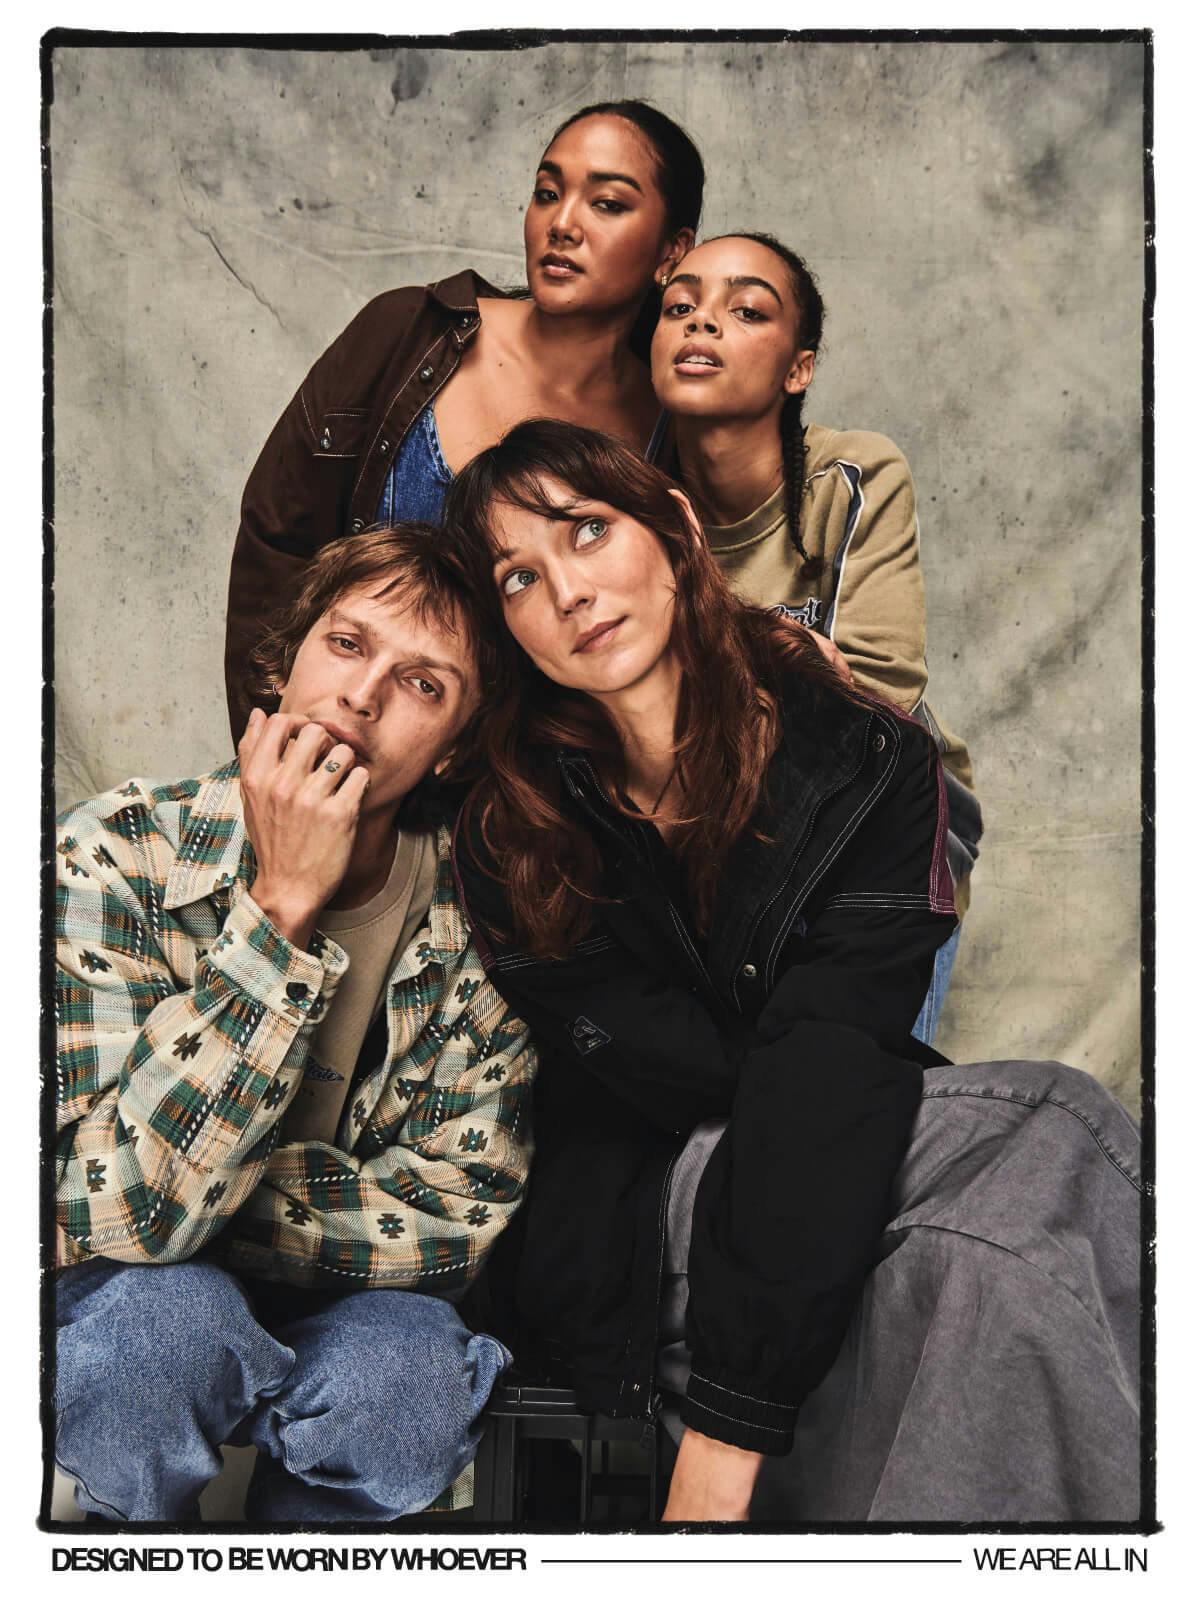 Image of four models, the front two are sitting/squatting and the others lean over the top. Male model wears denim jeans and  a check jacket, female above him is wearing denim corset top and brown jacket. Female model next to her is wearing a vintage looking crew. Female model at the front wears a grey cargo maxi skirt and a black spray jacket. Image sits in a black frame and text under reads "designed to be worn by whoever. we are all in."